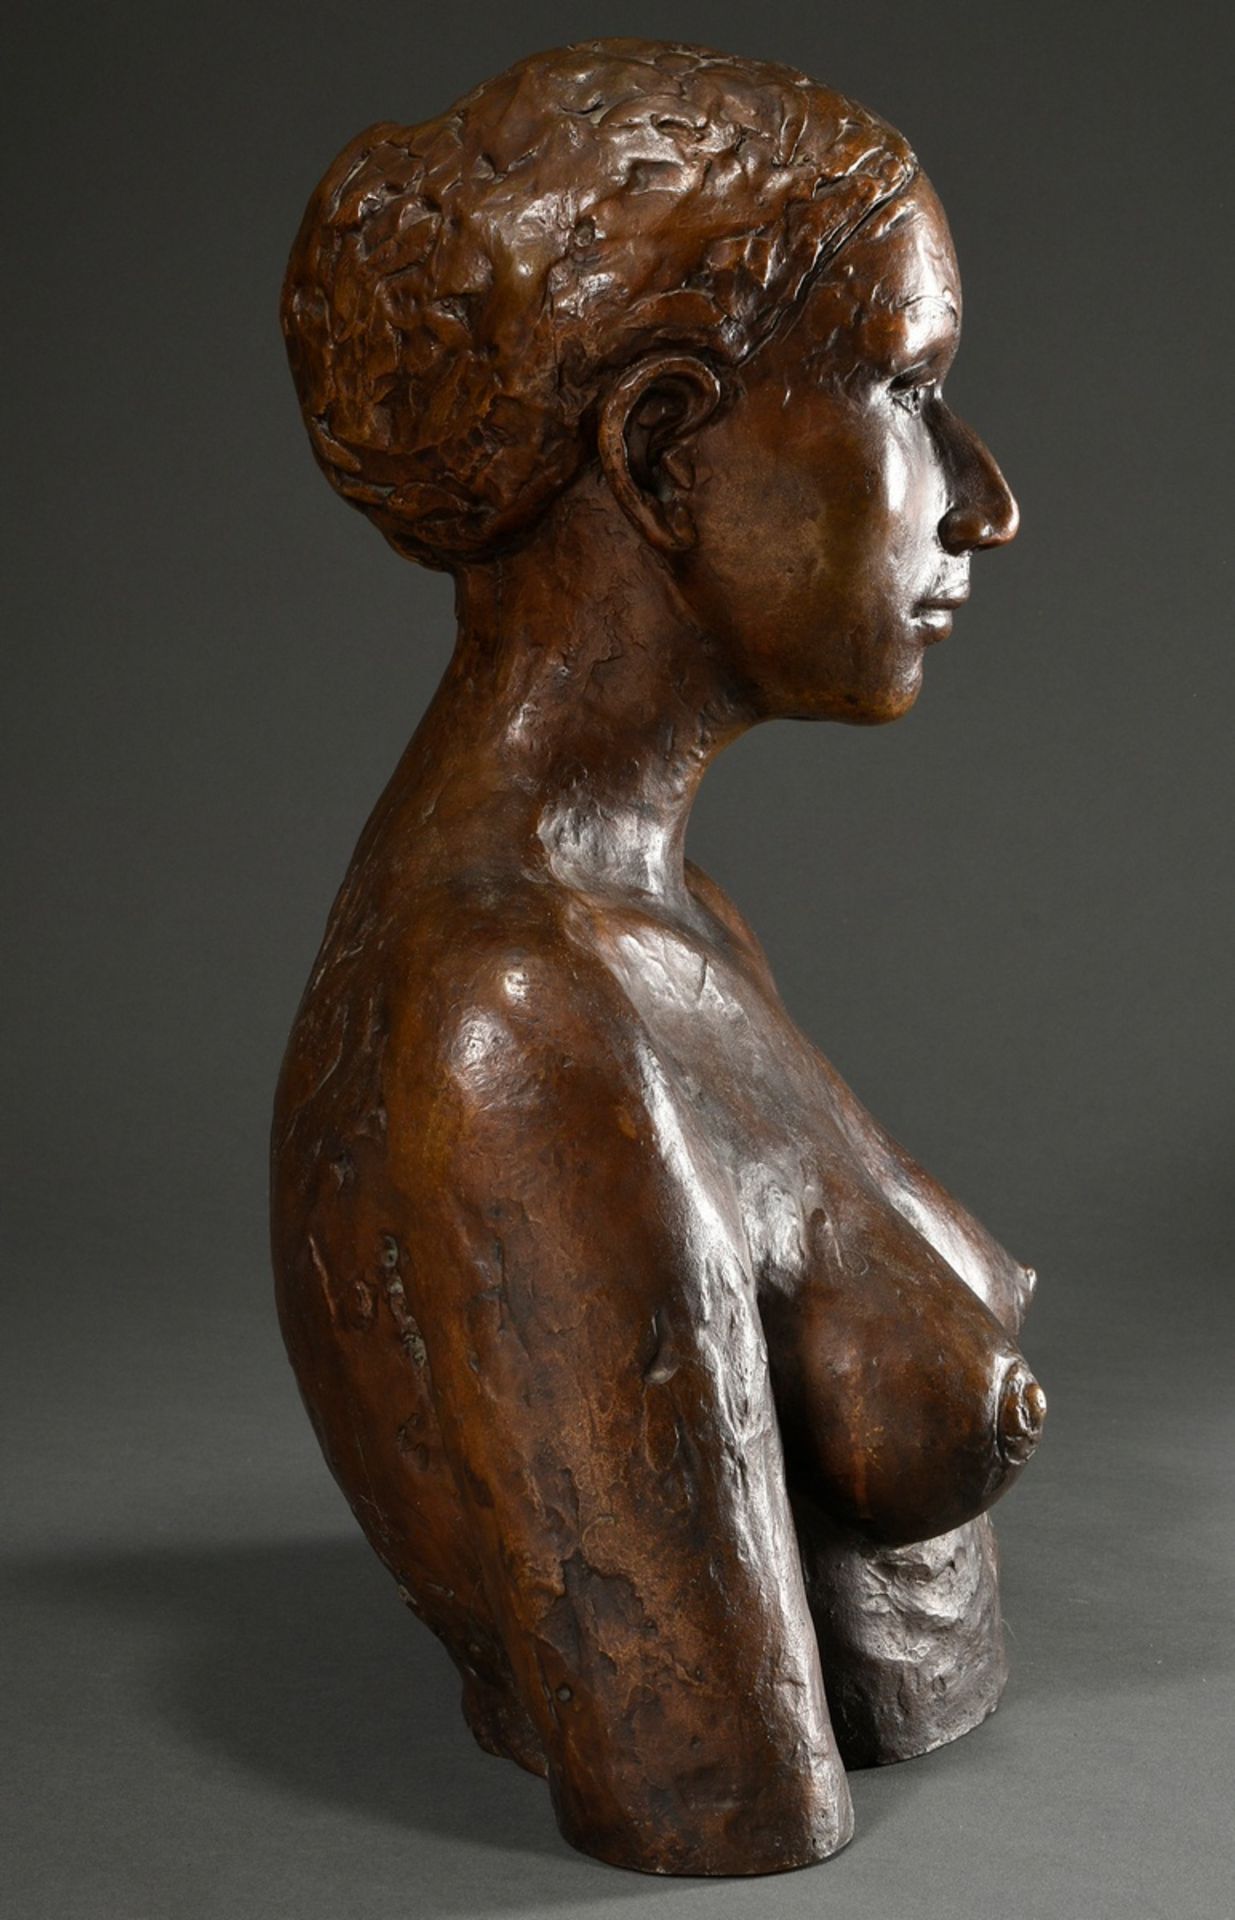 Augustin, Edgar (1936-1996) "Female Bust" 1971, verso sign./dat., bronze with brownish patina, cast - Image 3 of 7